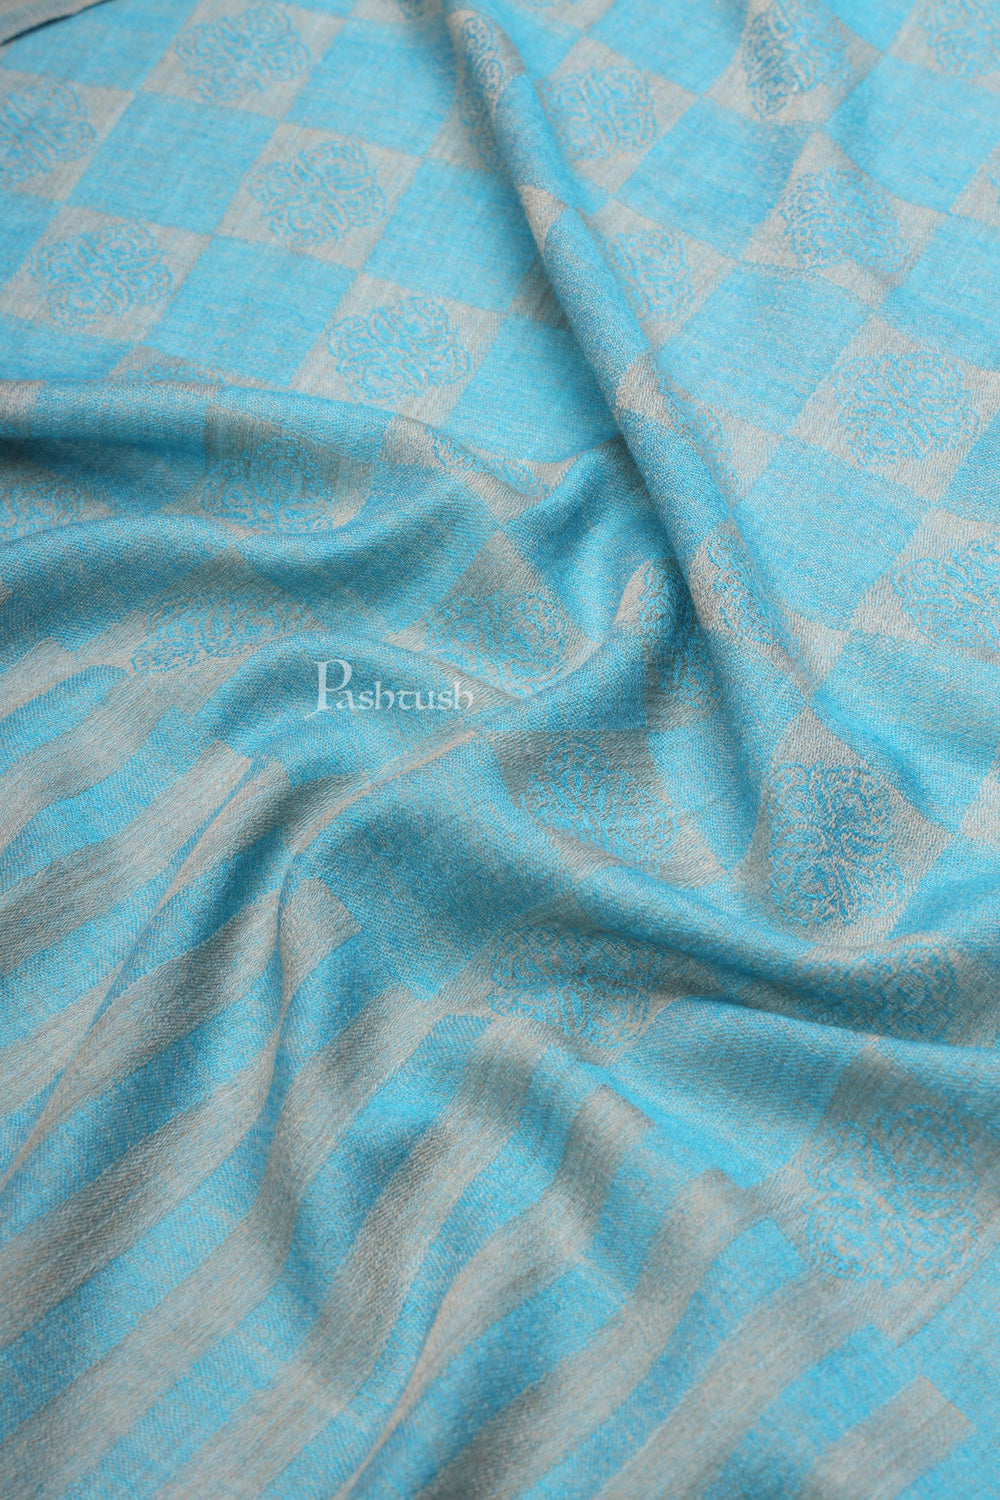 Pashtush India Womens Stoles and Scarves Scarf Pashtush Womens Extra Fine Wool Stole, Checkered Design, Sky Blue